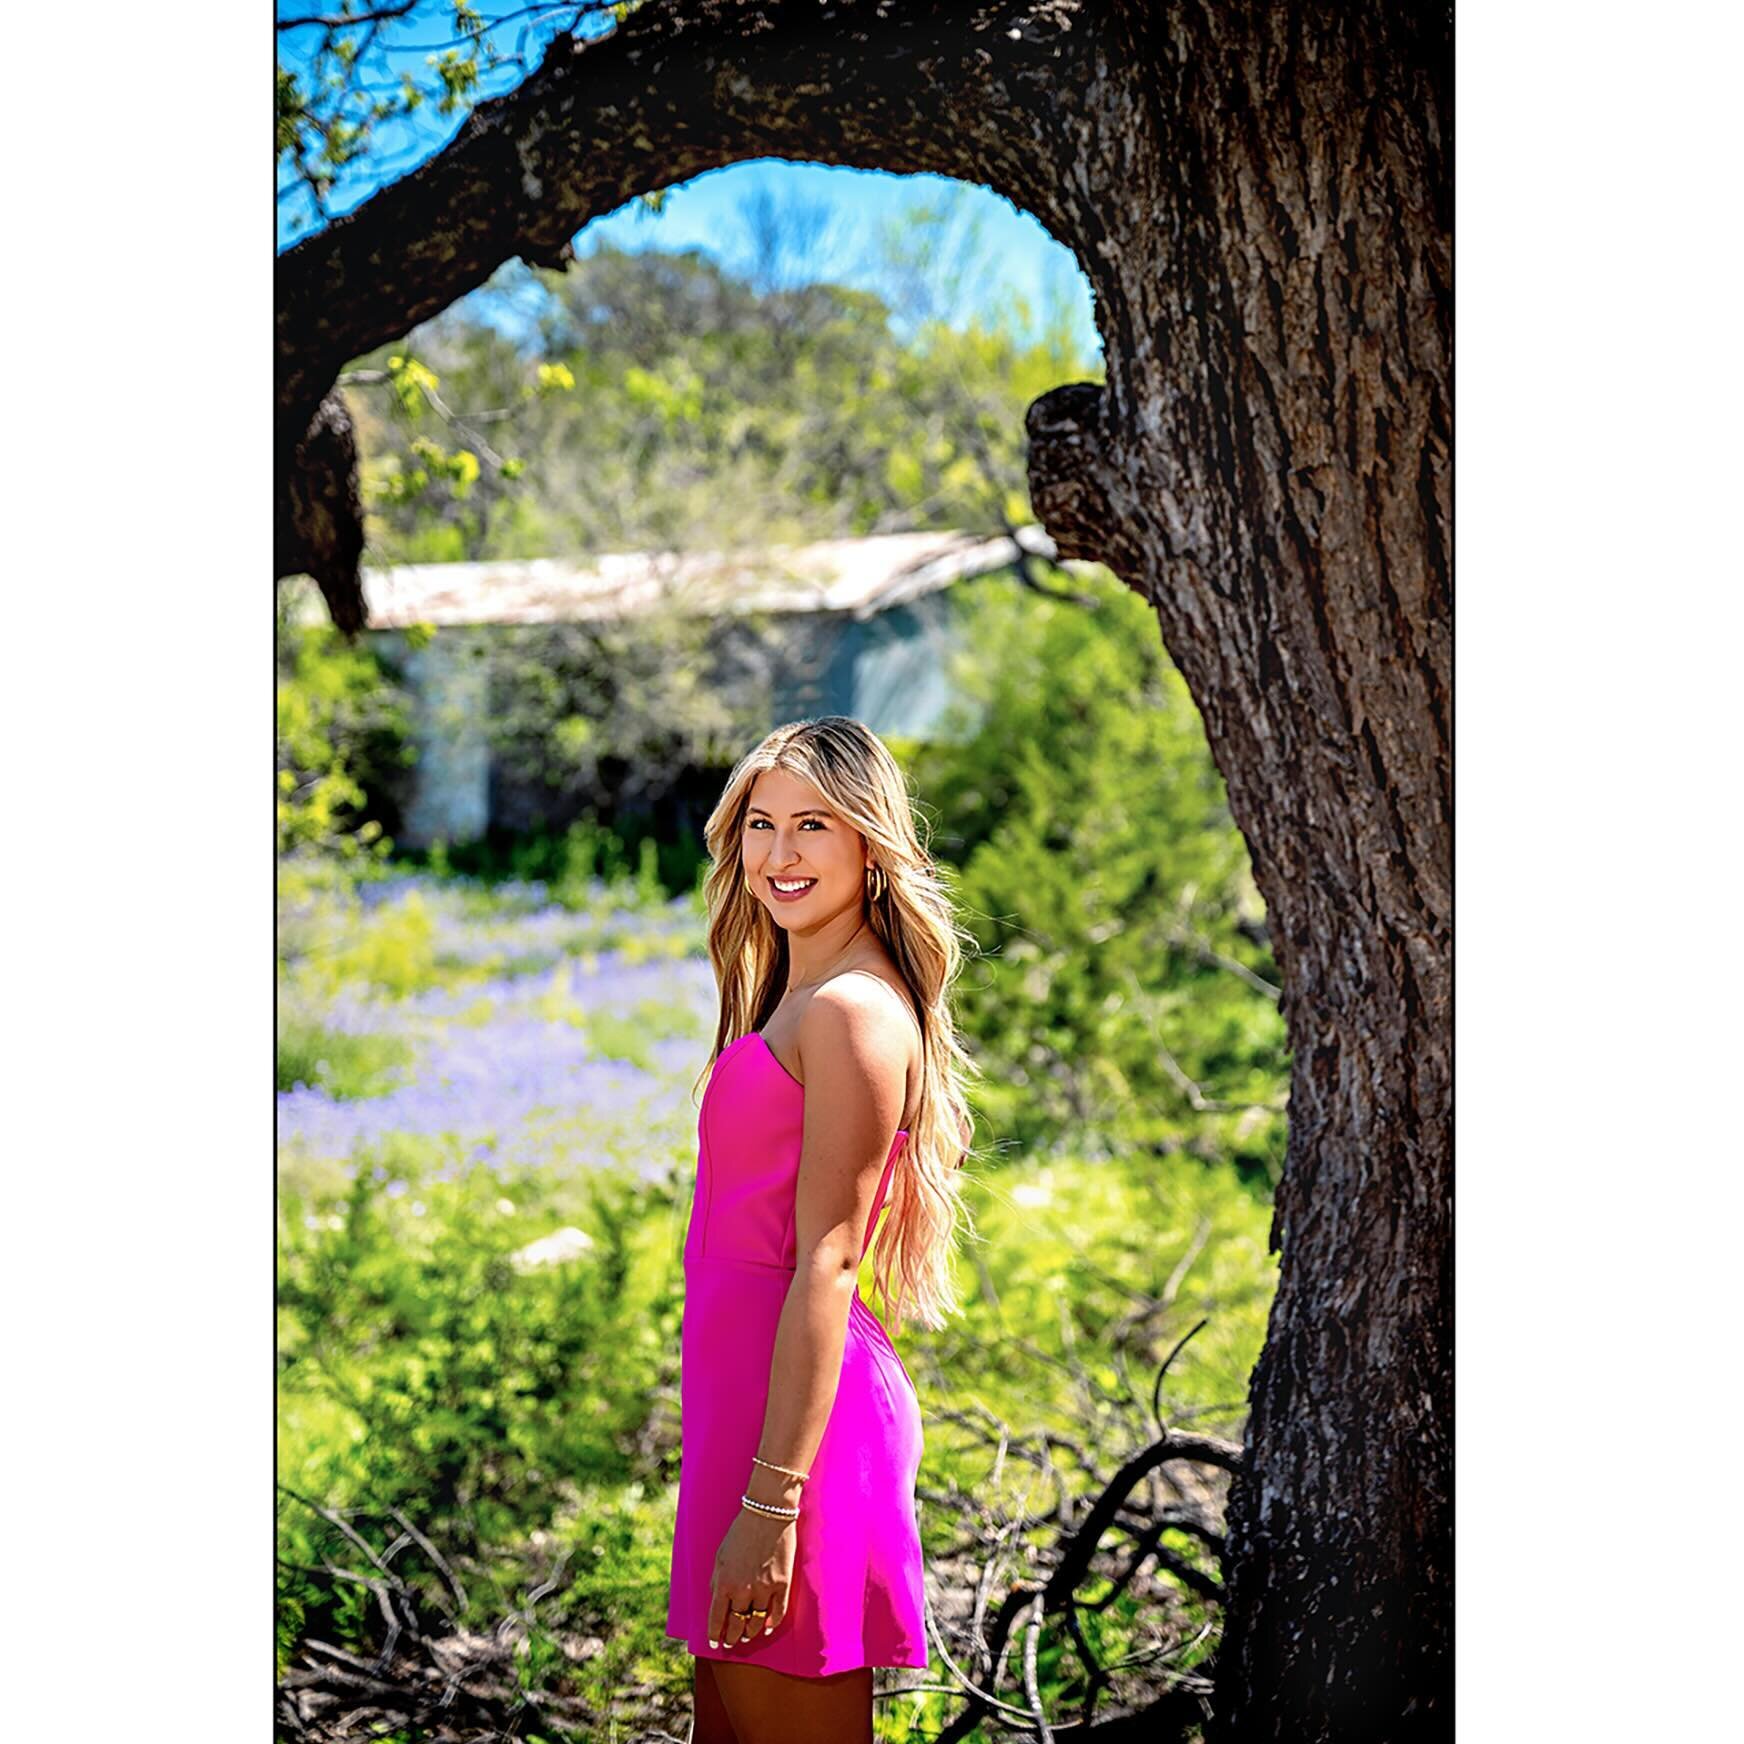 From yesterday&rsquo;s epic Senior Session with stunning Claire. One of many sneak peeks 💕
.
.
.
#seniorsession #classof2024 #pink #ranch #posepatch #senioryearmagezine #shineon